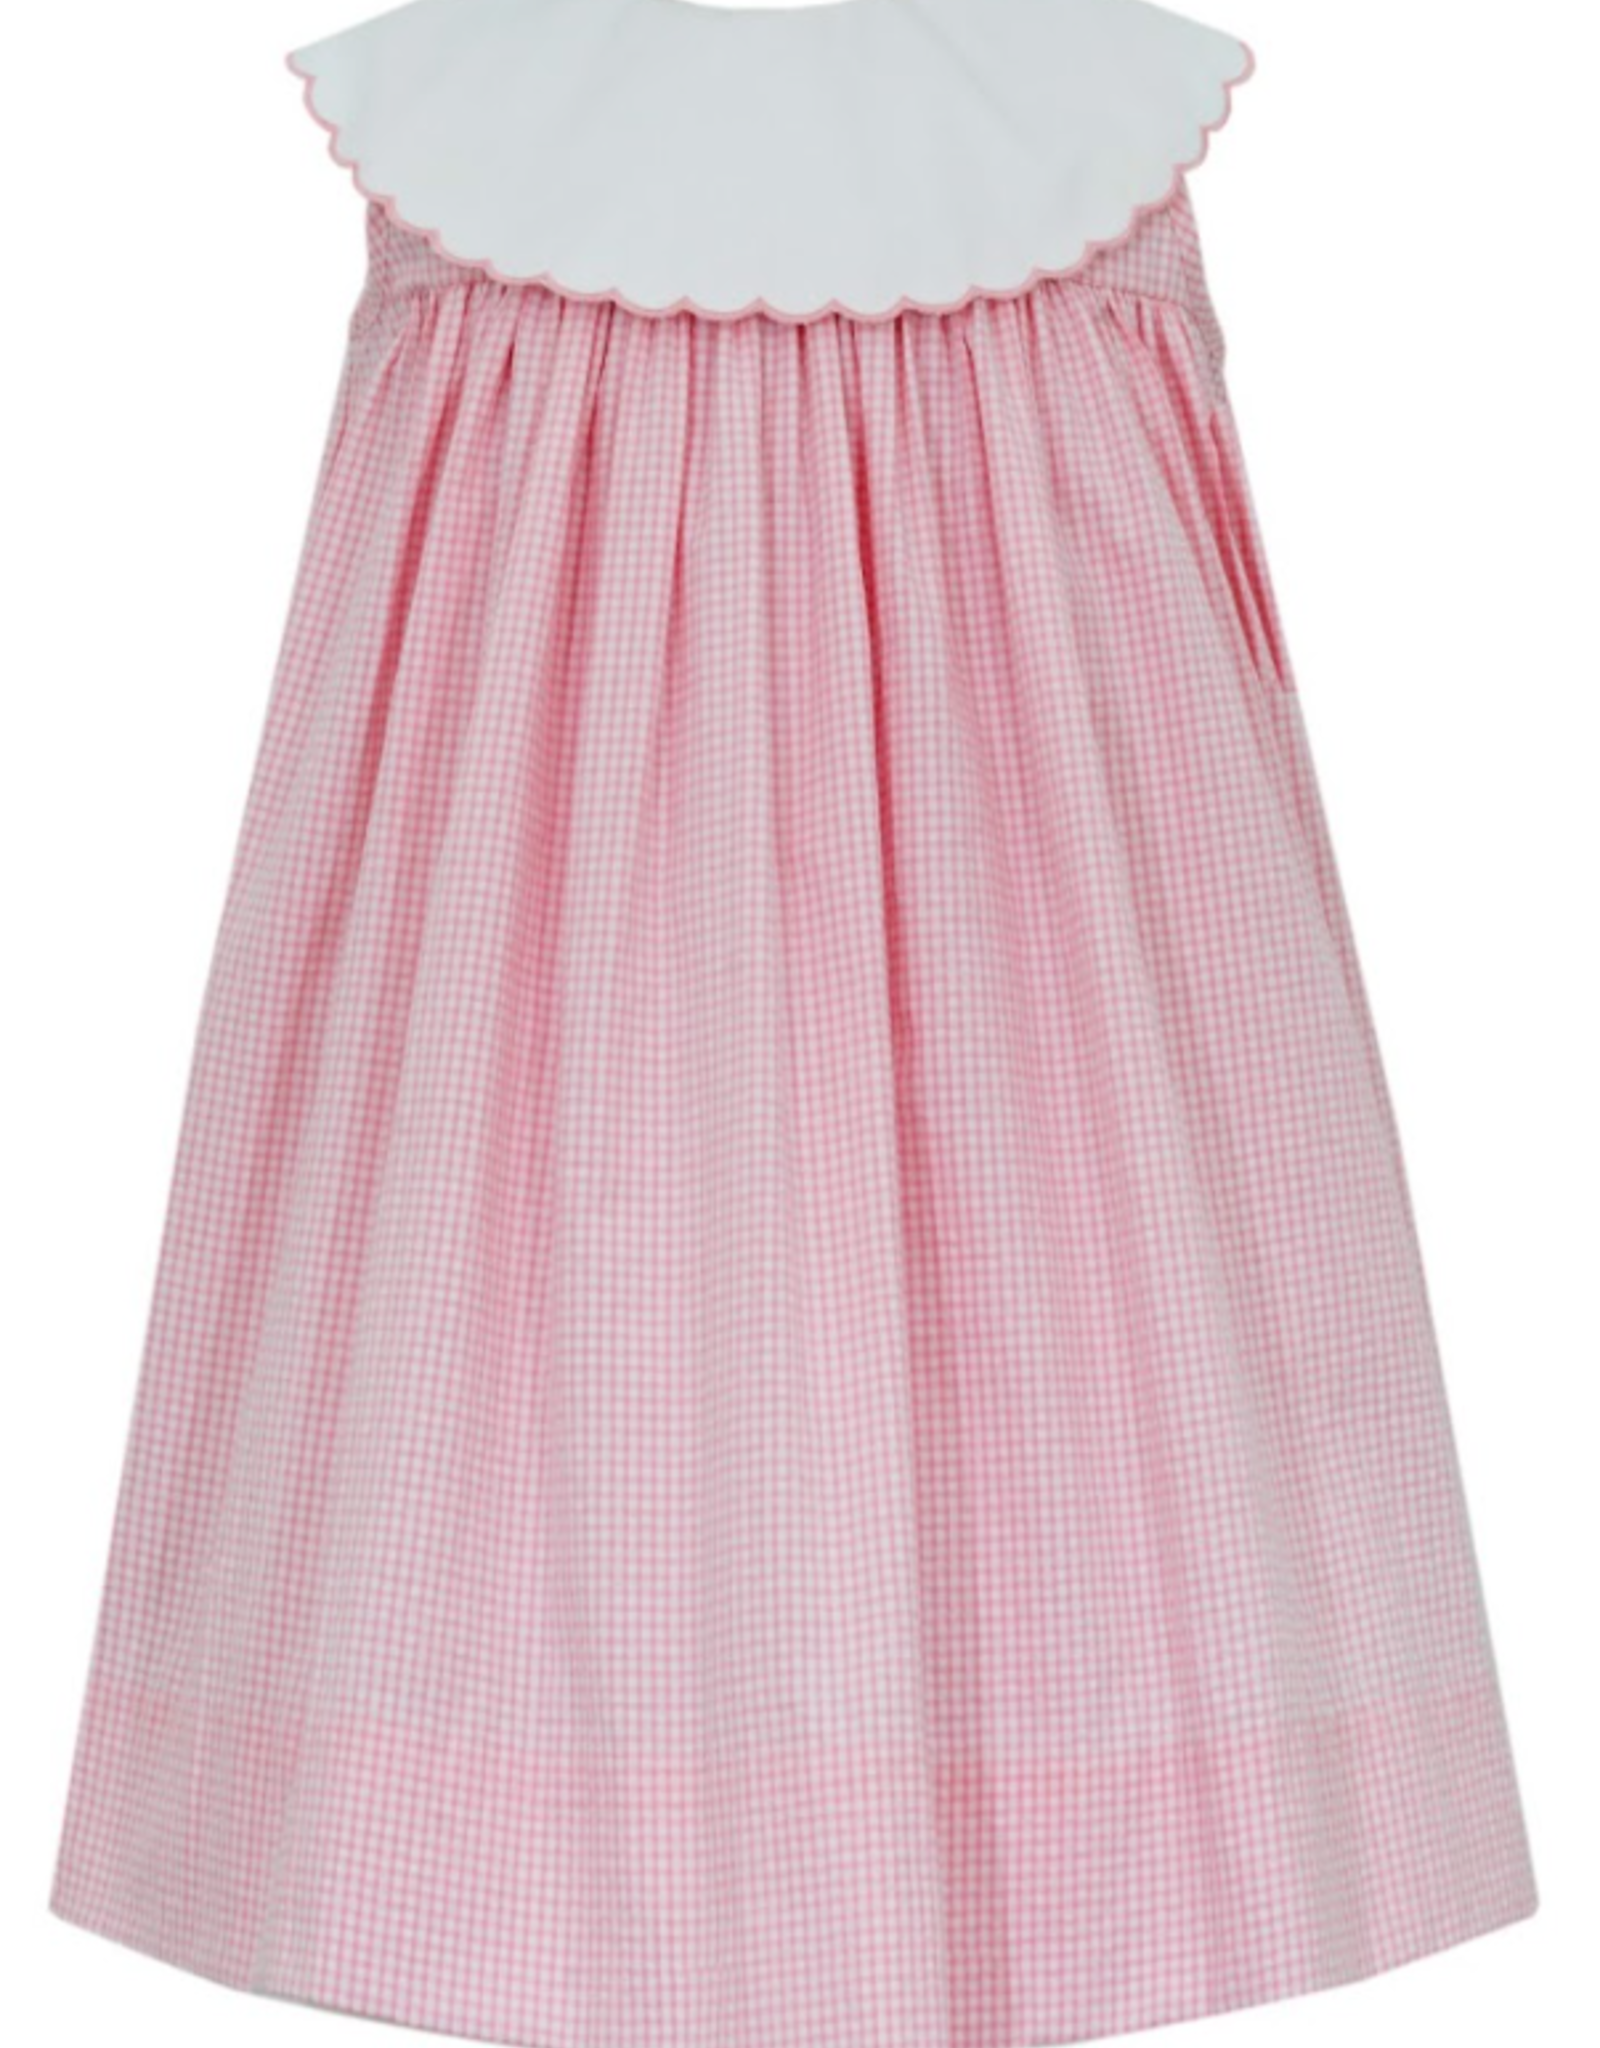 Claire and Charlie Pink Seersucker Gingham Float w/ Scalloped Collar